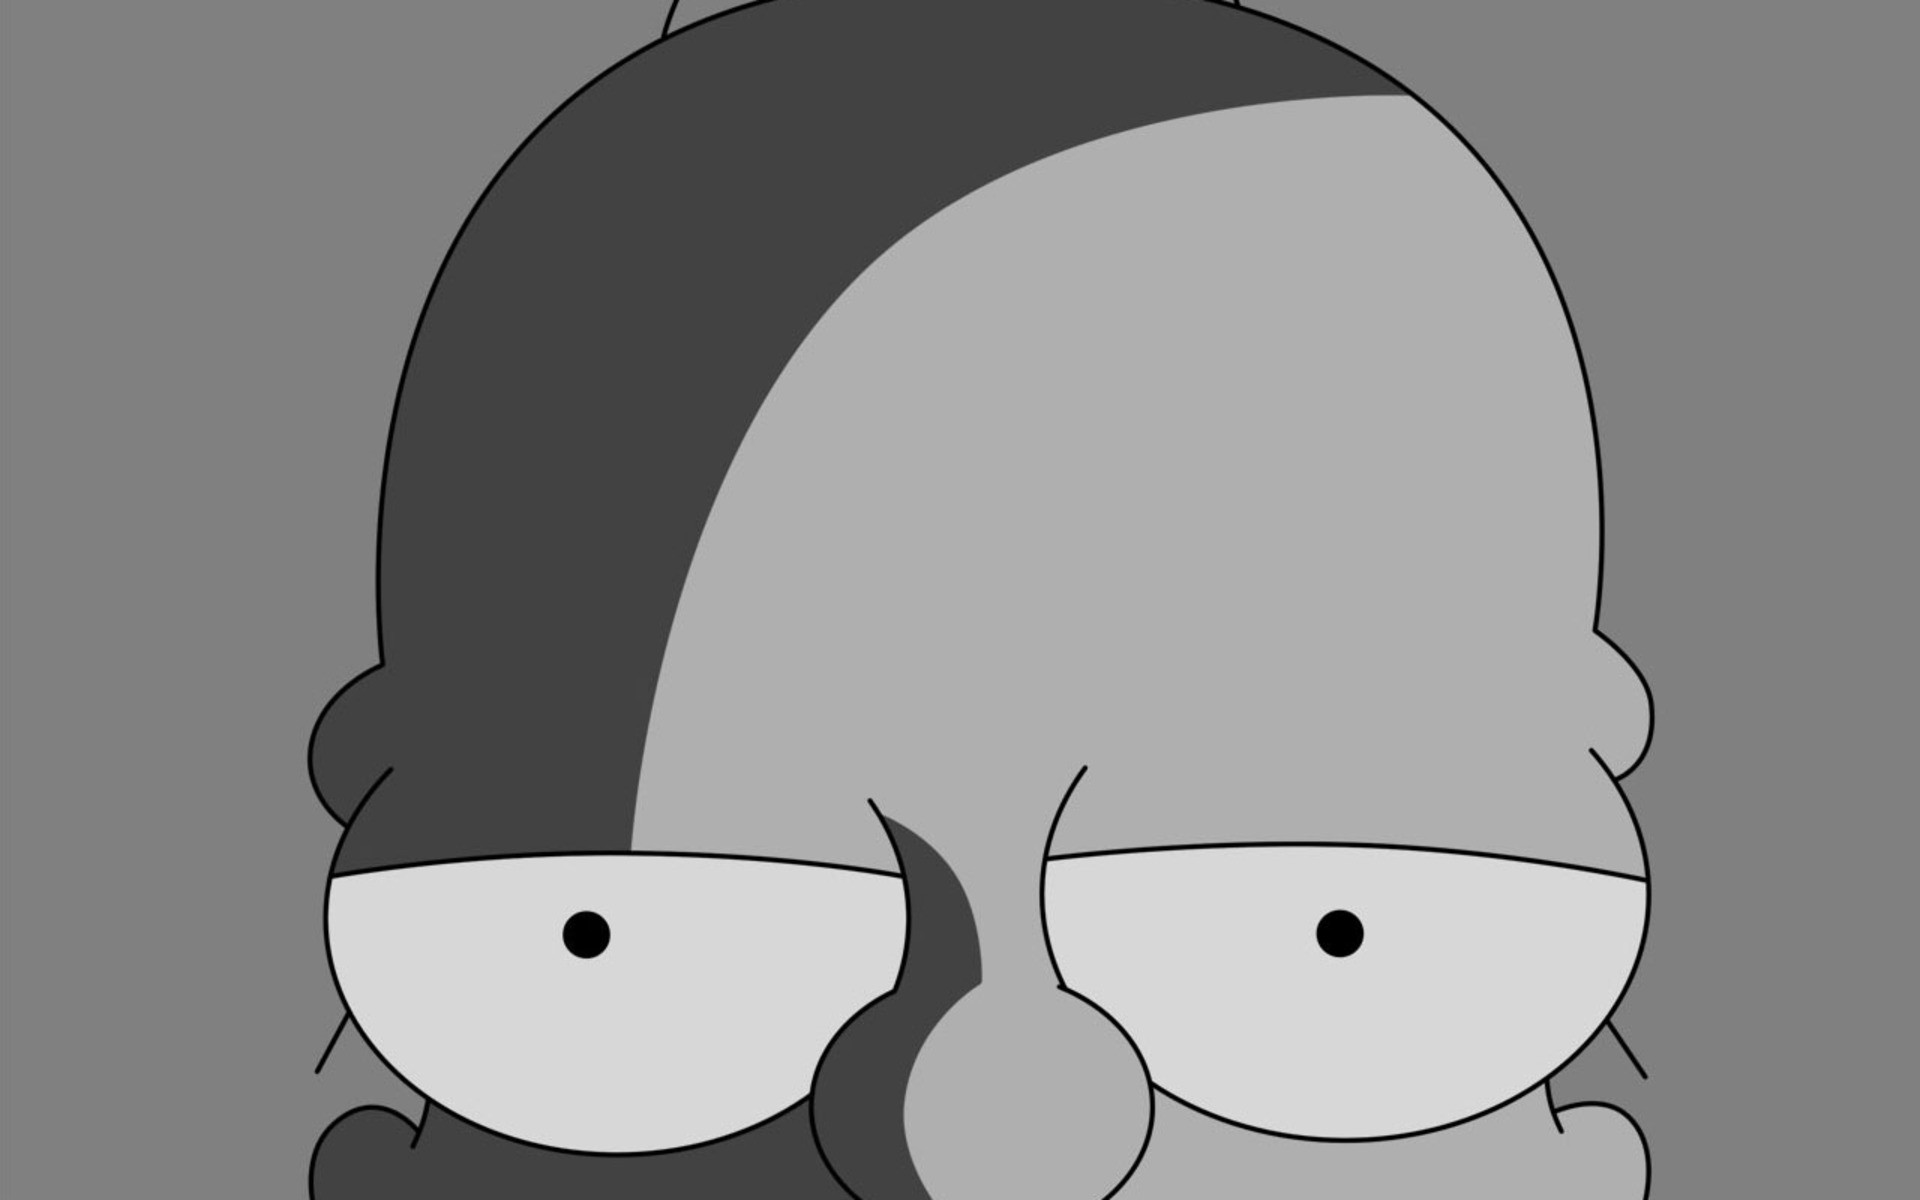 General 1920x1200 The Simpsons Homer Simpson cartoon gray background gray TV series monochrome simple background